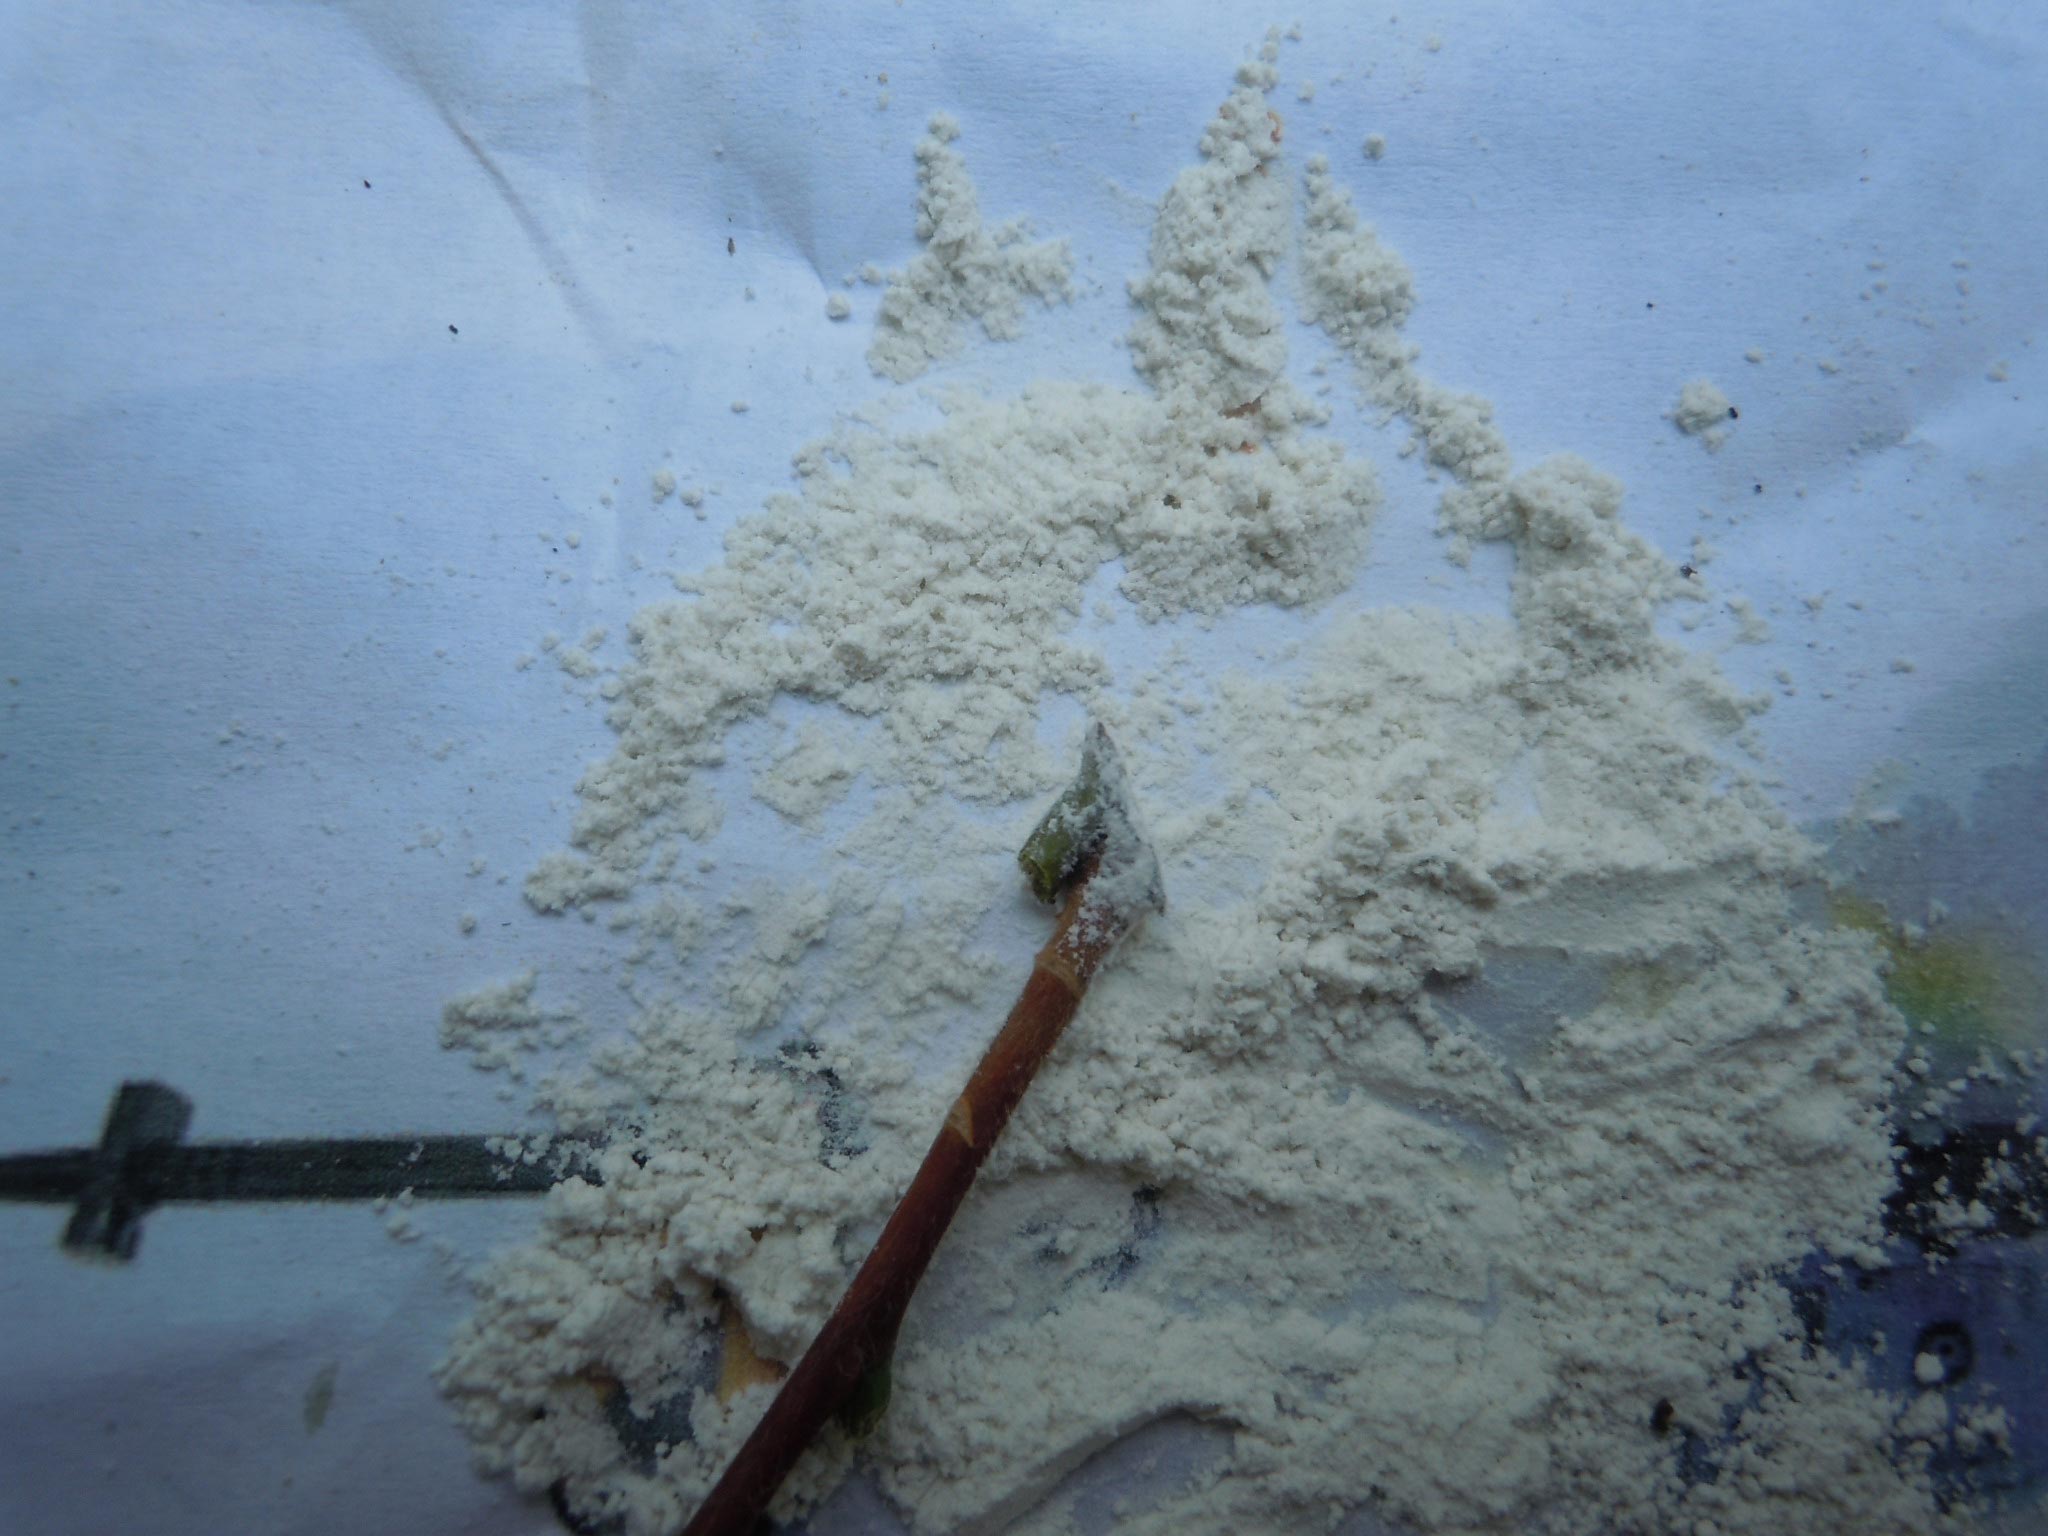 dip end of each cutting into rooting hormone powder